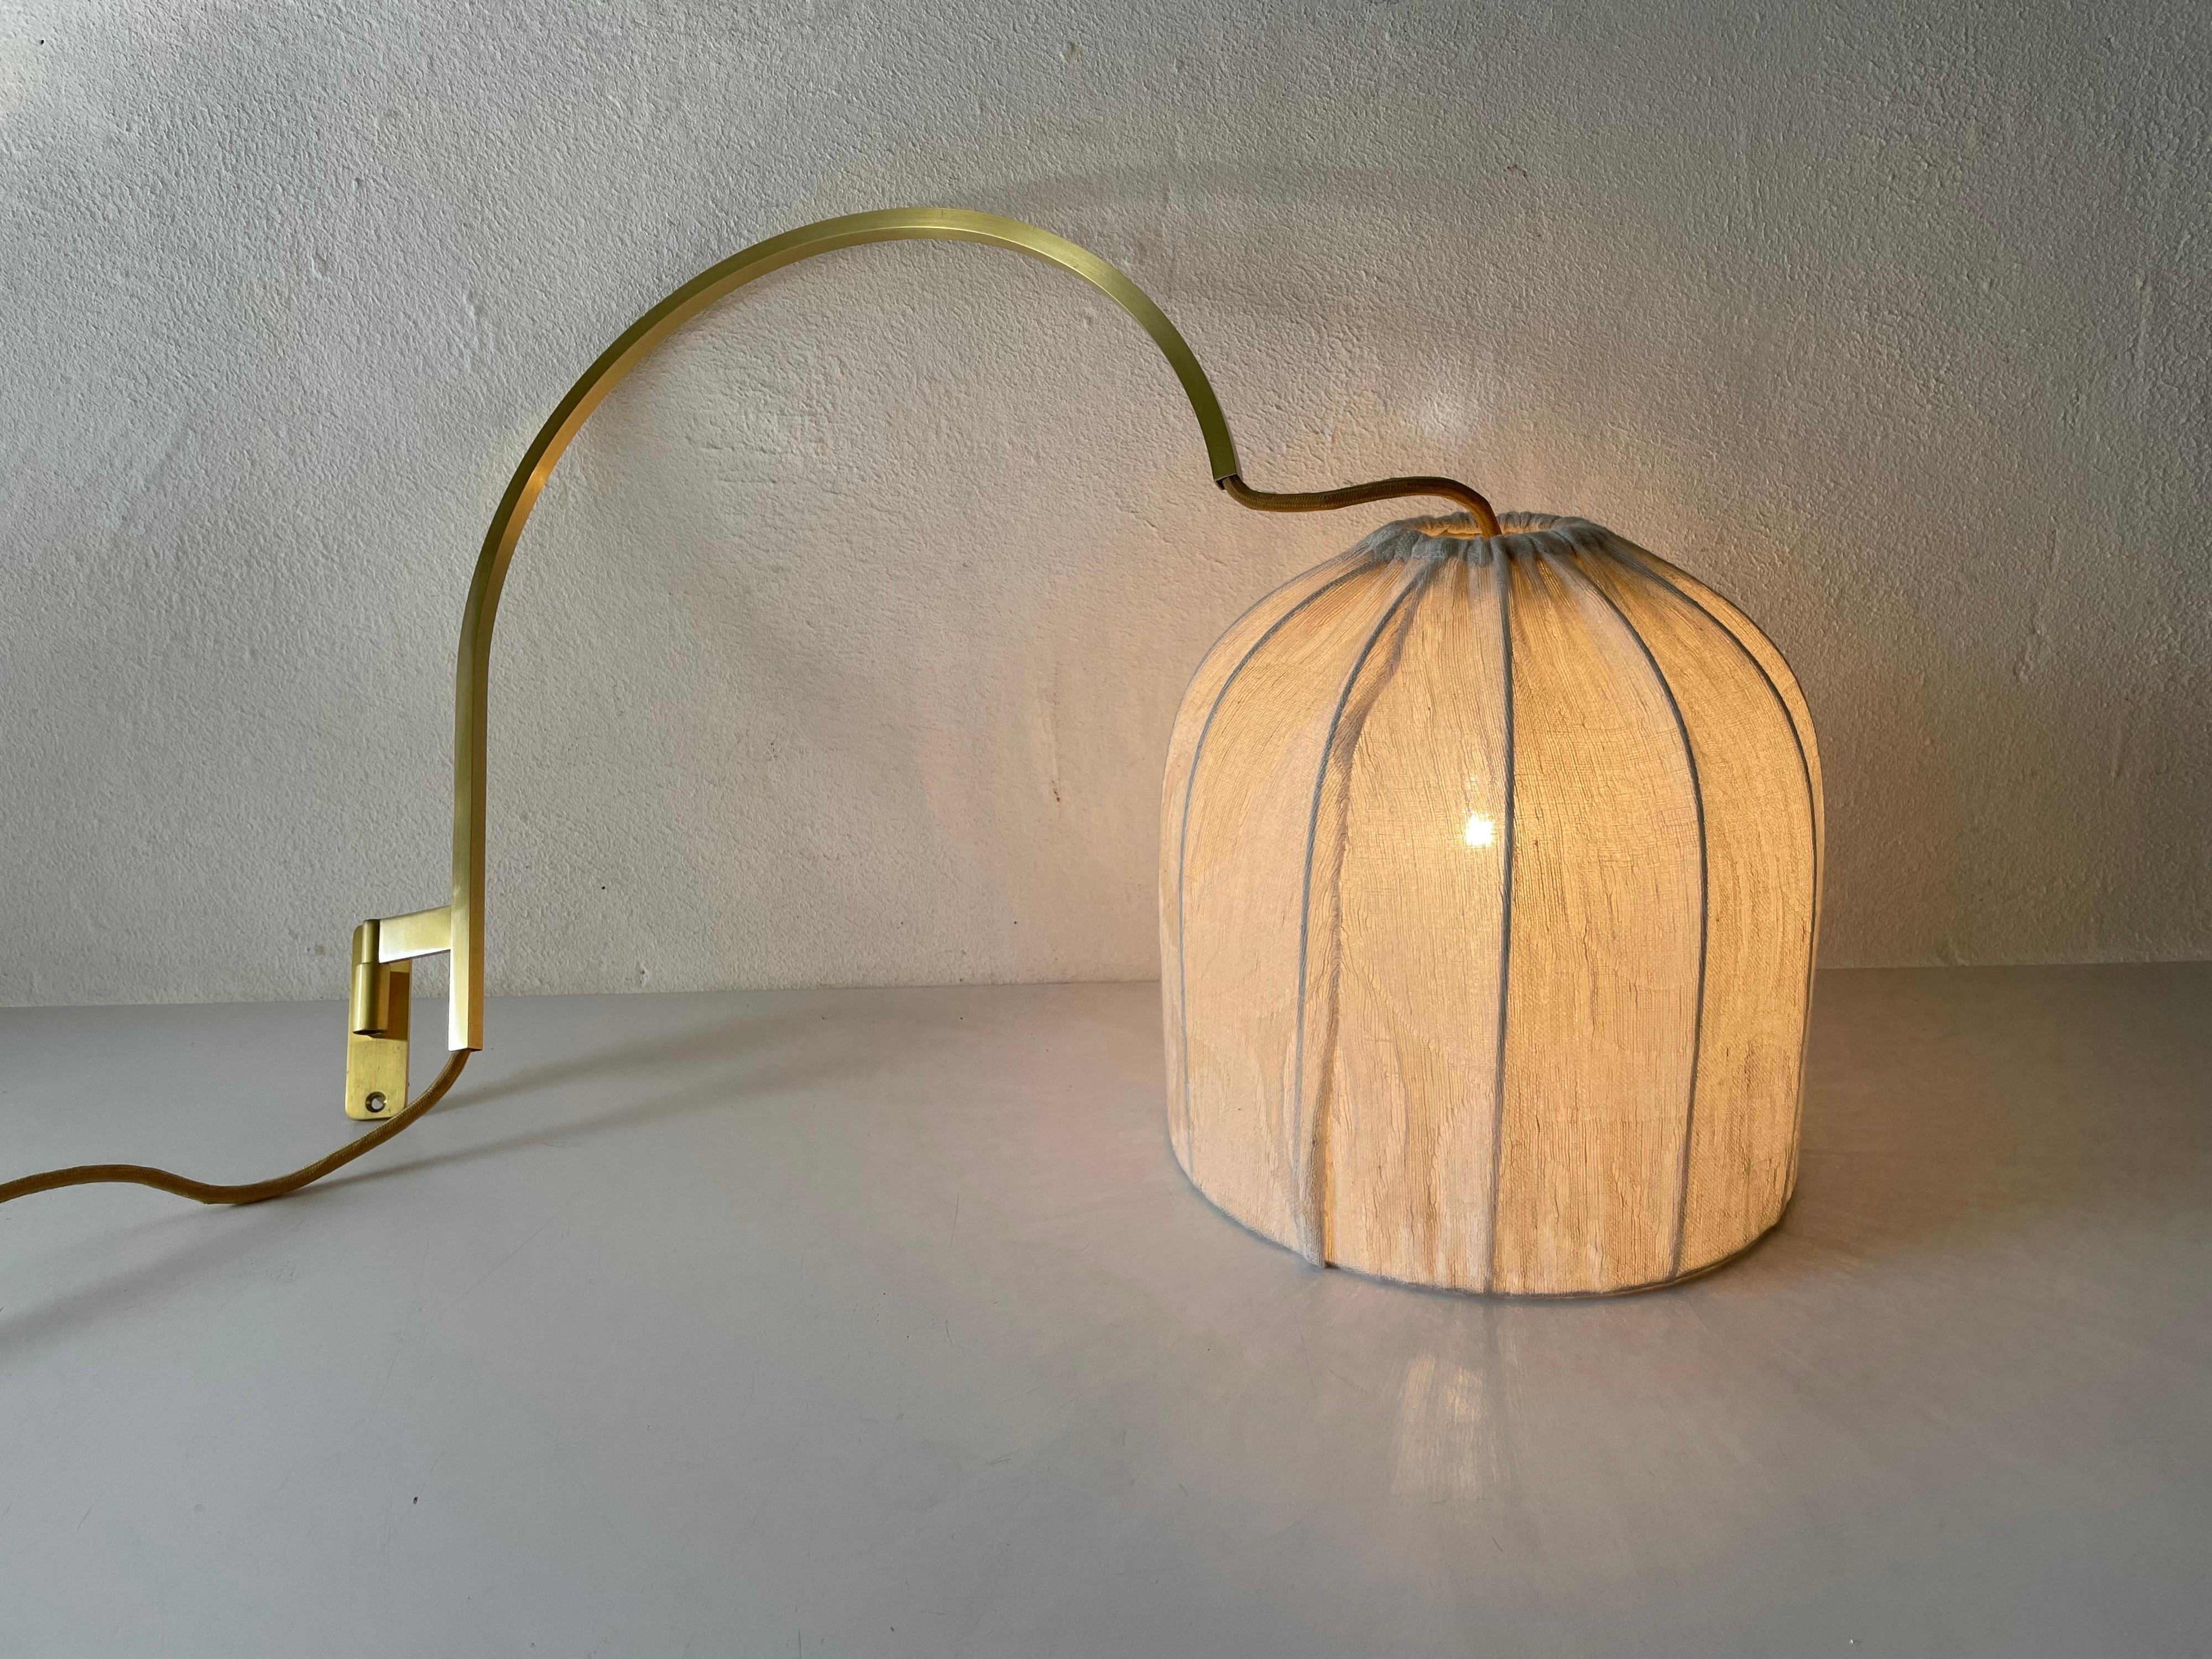 Arch Shaped Brass Body Fabric Shade Wall Lamp by WKR Leuchten, 1970s, Germany For Sale 7